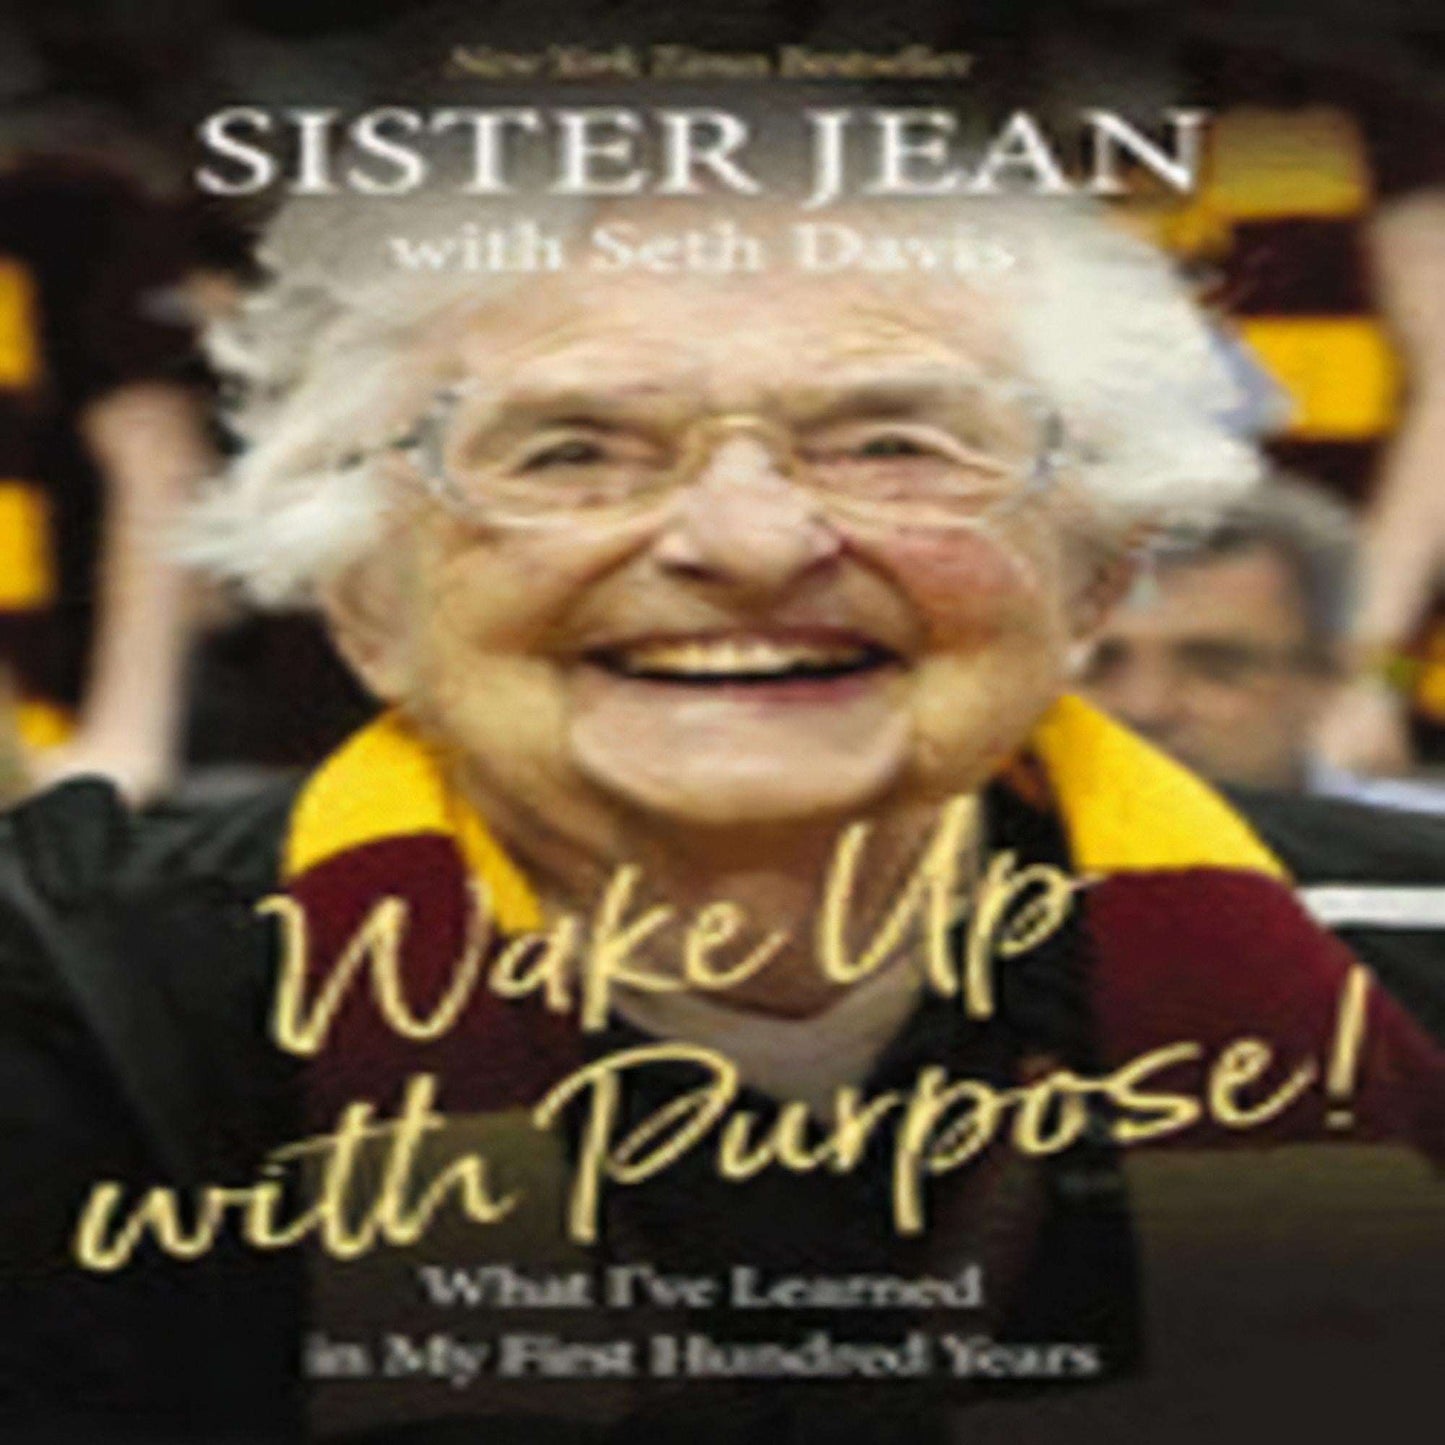 Wake Up with Purpose!: What I've Learned in My First Hundred Years737-050623-9781400333516DPGBOOKSTORE.COM. Today's Bestsellers.